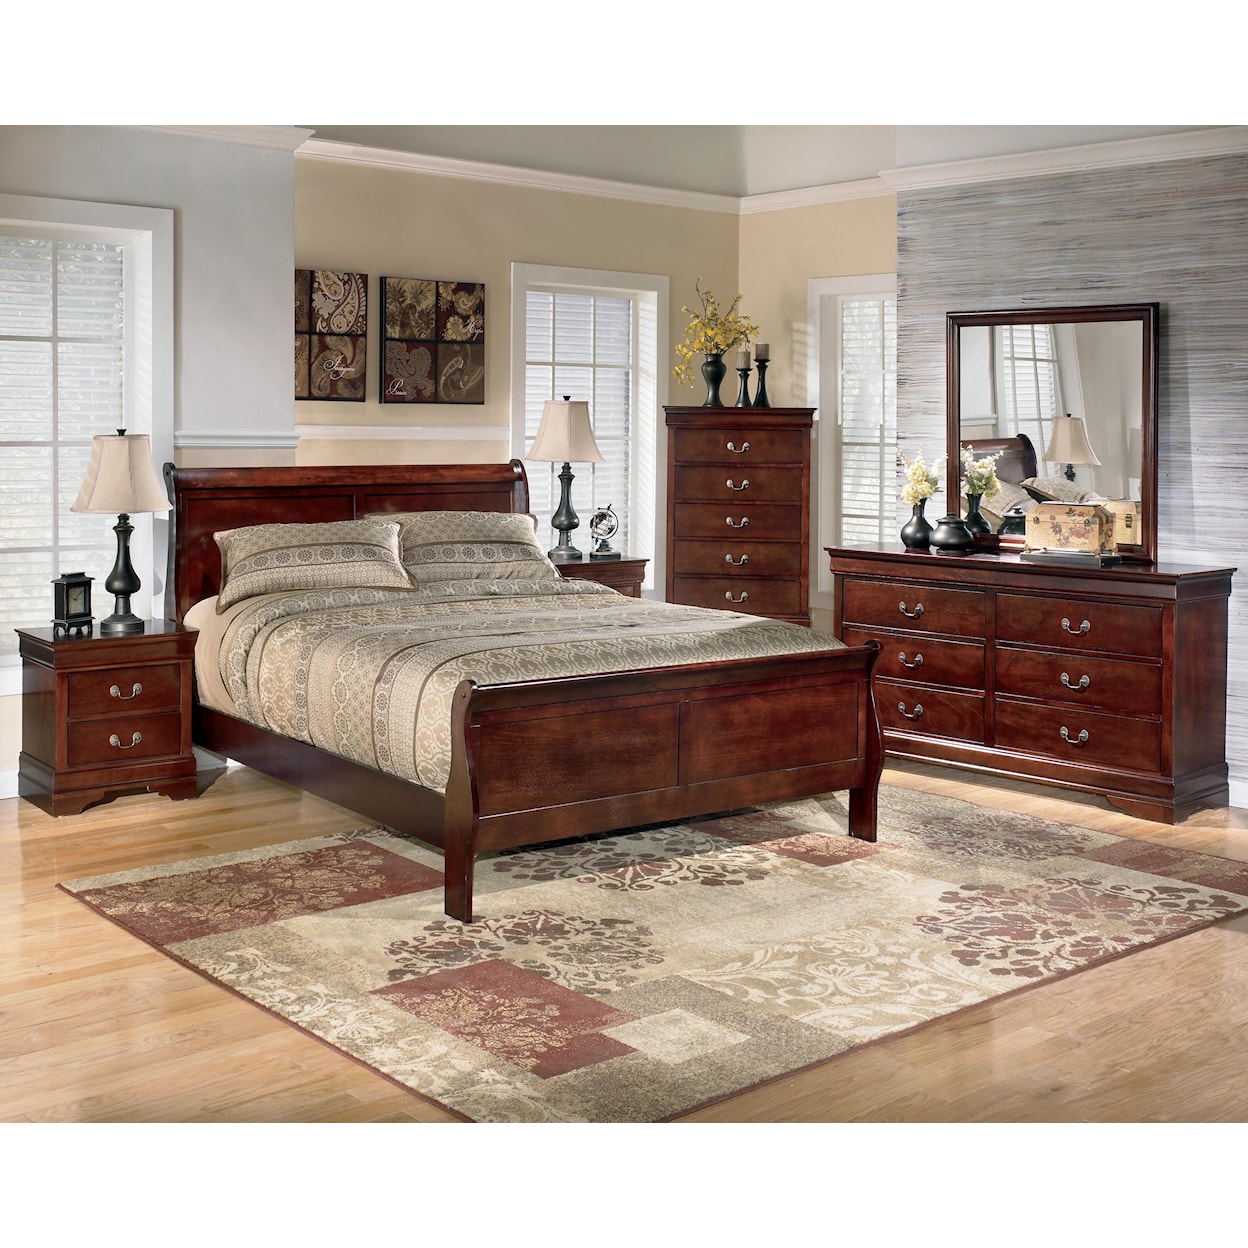 Signature Design by Ashley Alisdair 5 Piece King Bedroom Group